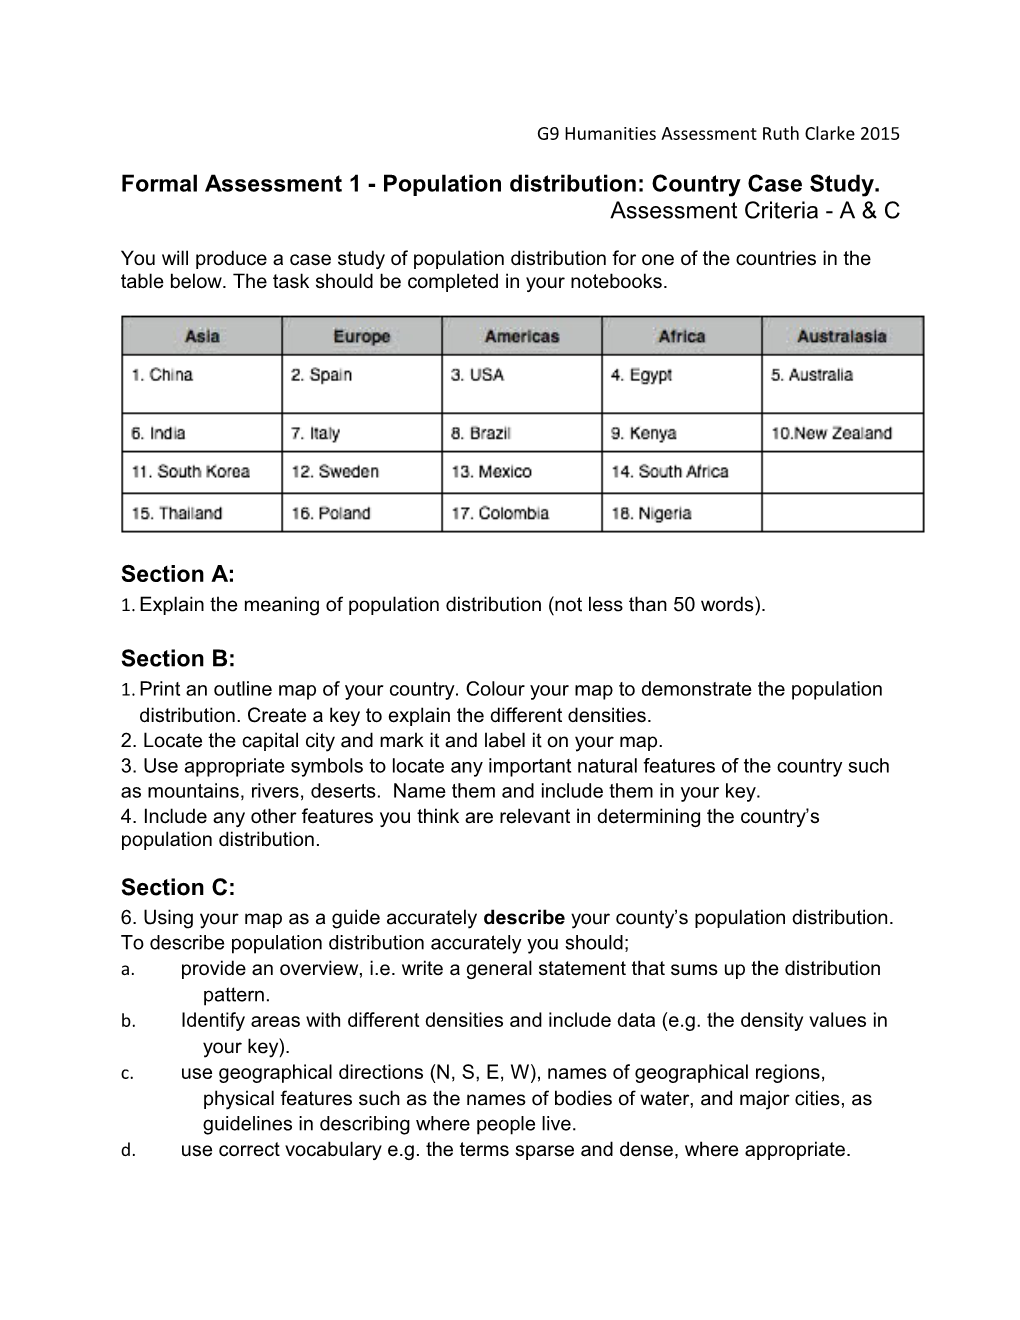 Formal Assessment 1 - Population Distribution: Country Case Study